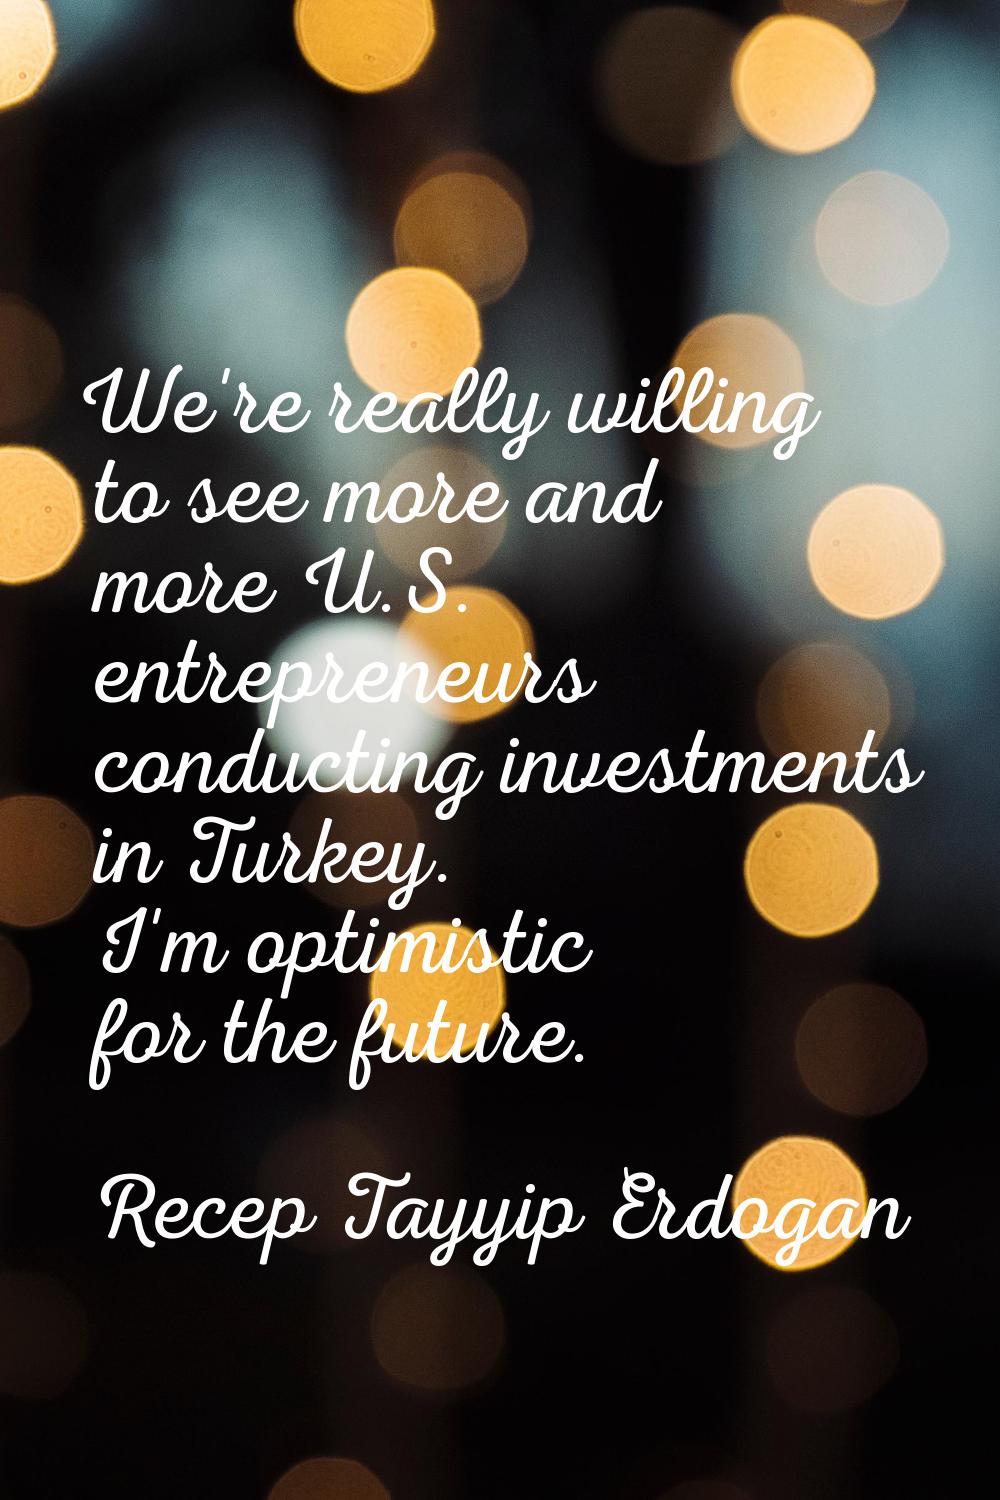 We're really willing to see more and more U.S. entrepreneurs conducting investments in Turkey. I'm 